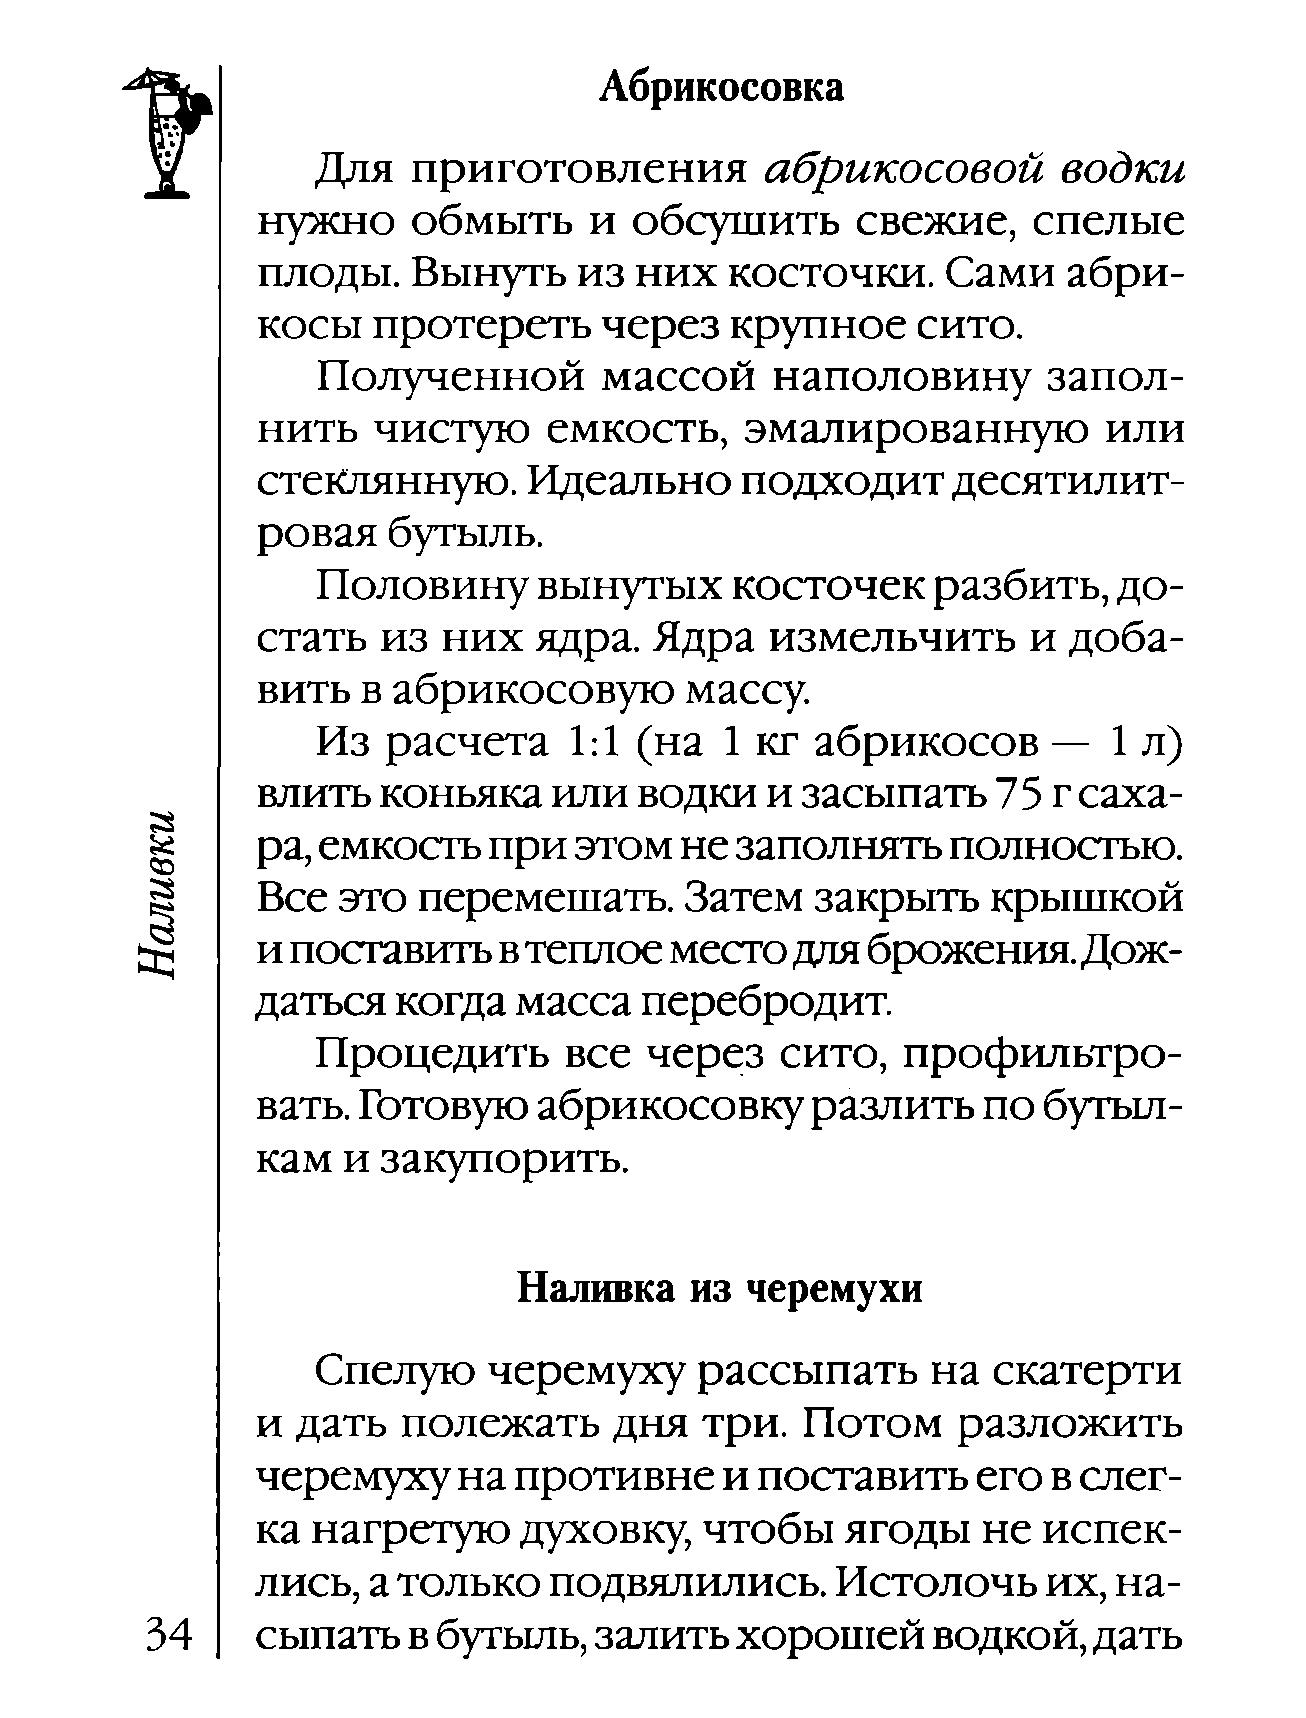 Page34